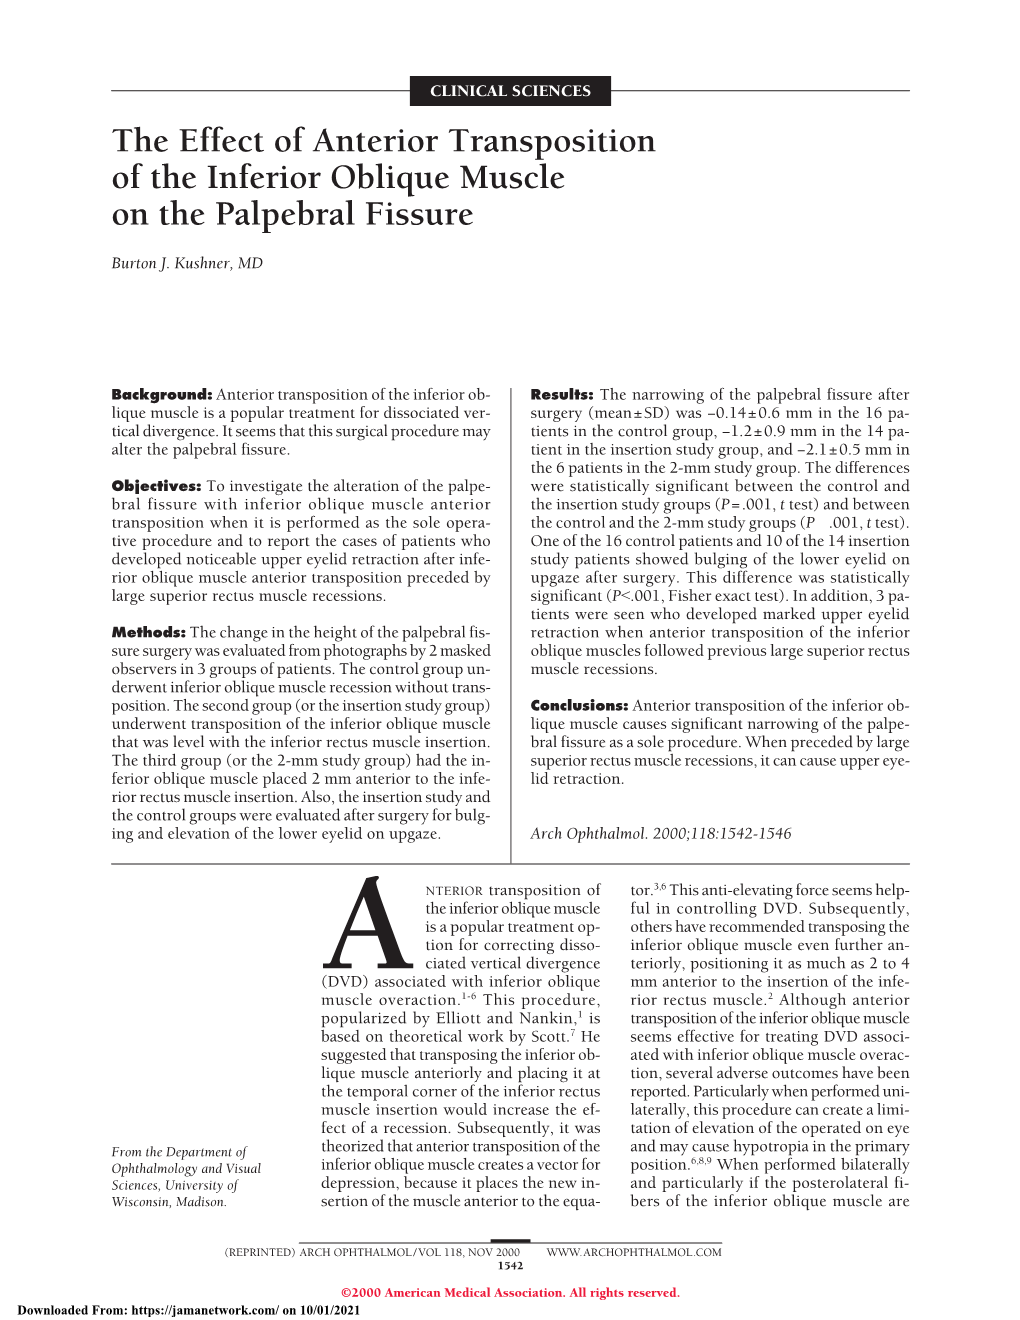 The Effect of Anterior Transposition of the Inferior Oblique Muscle on the Palpebral Fissure